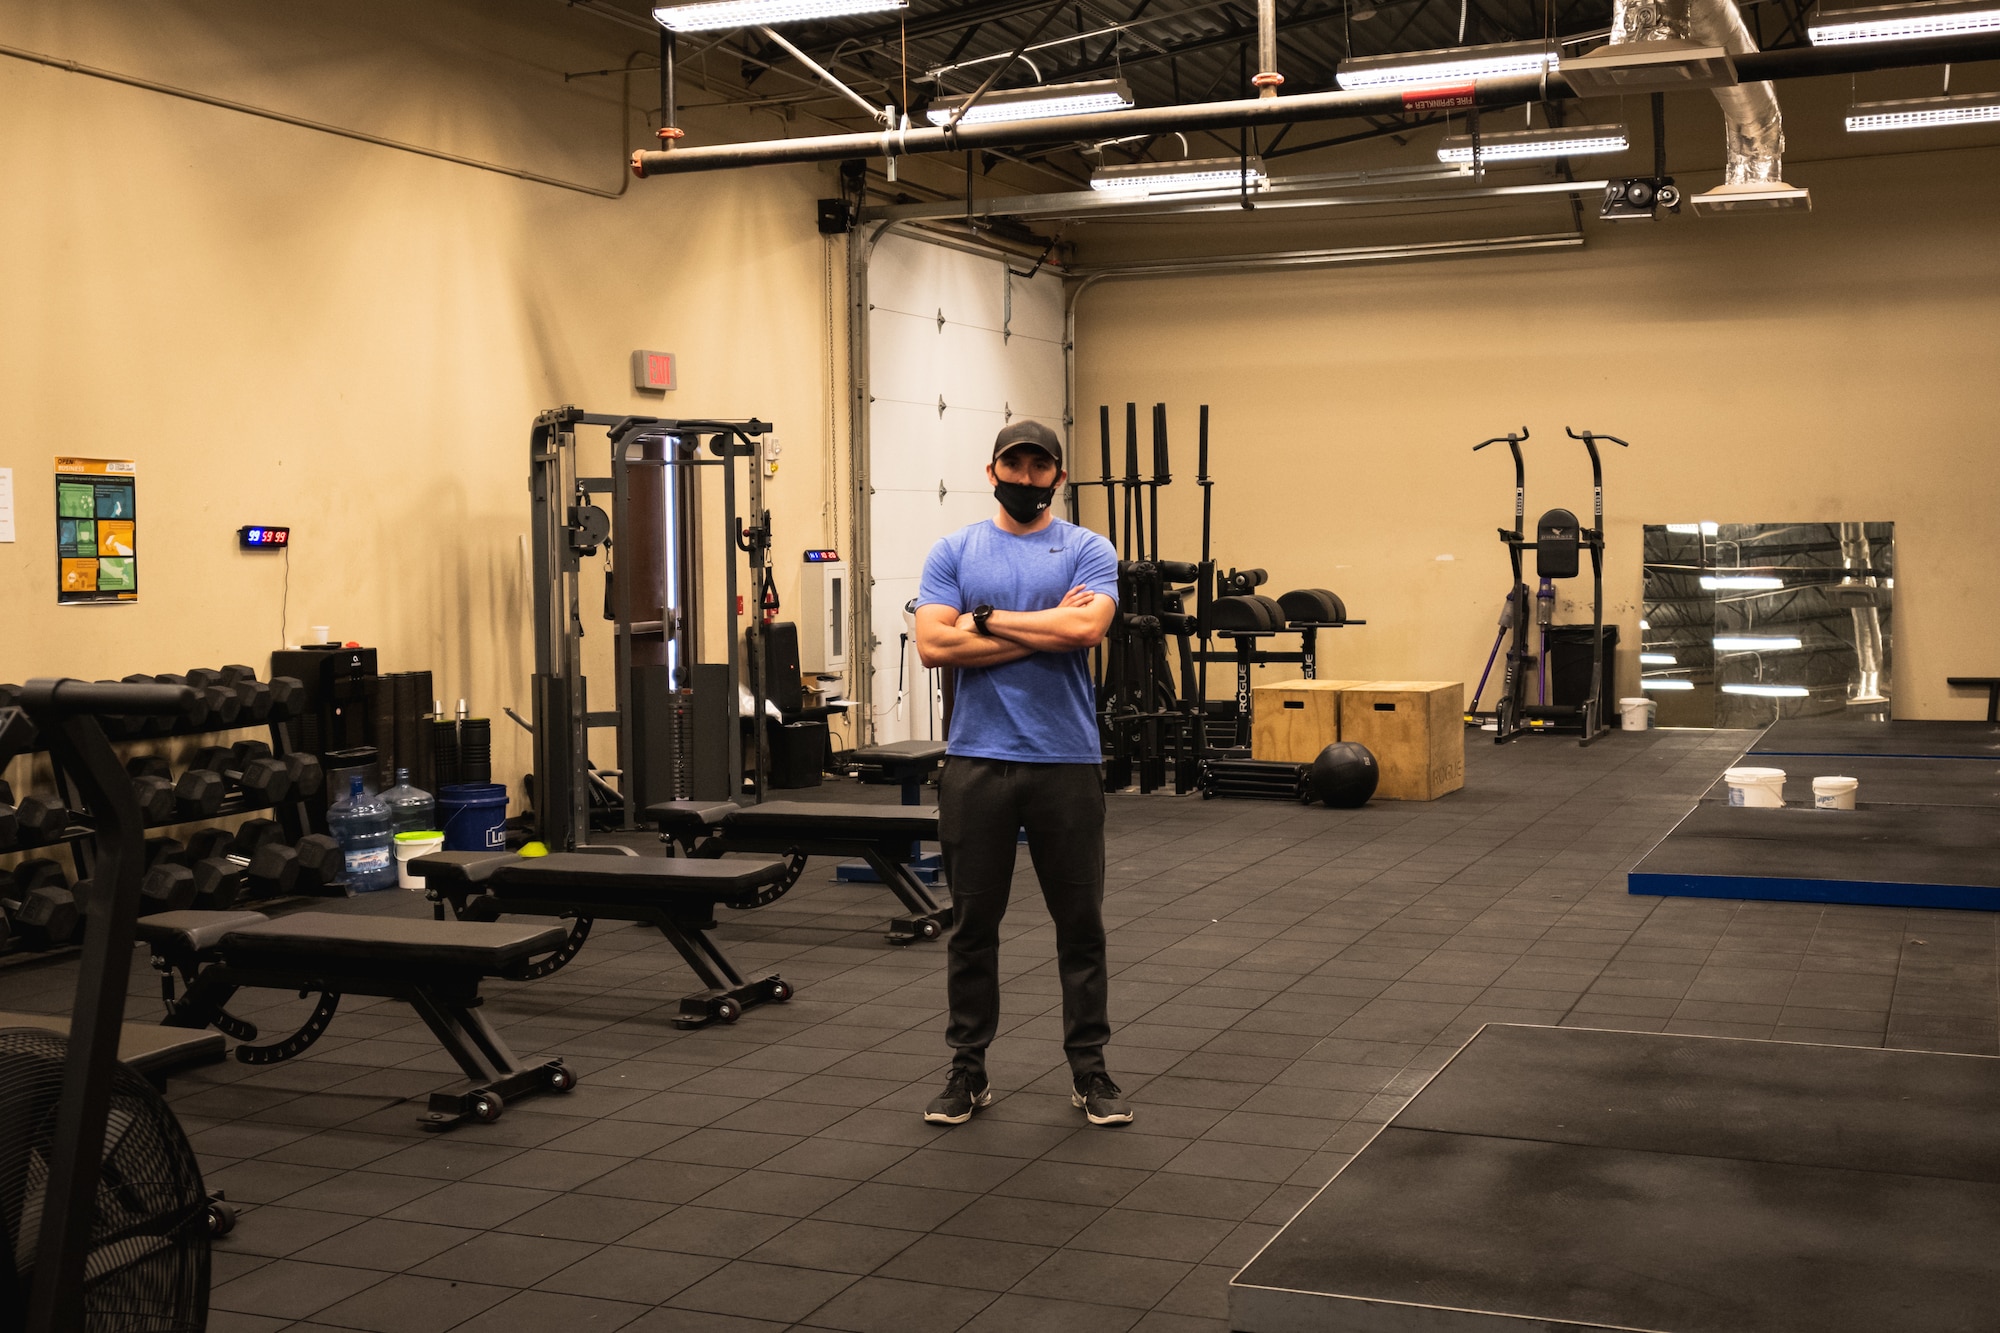 Man in a purple shirt, black pants, black hat and black mask stands in a large, dimly lit room surrounded by gym equipment.